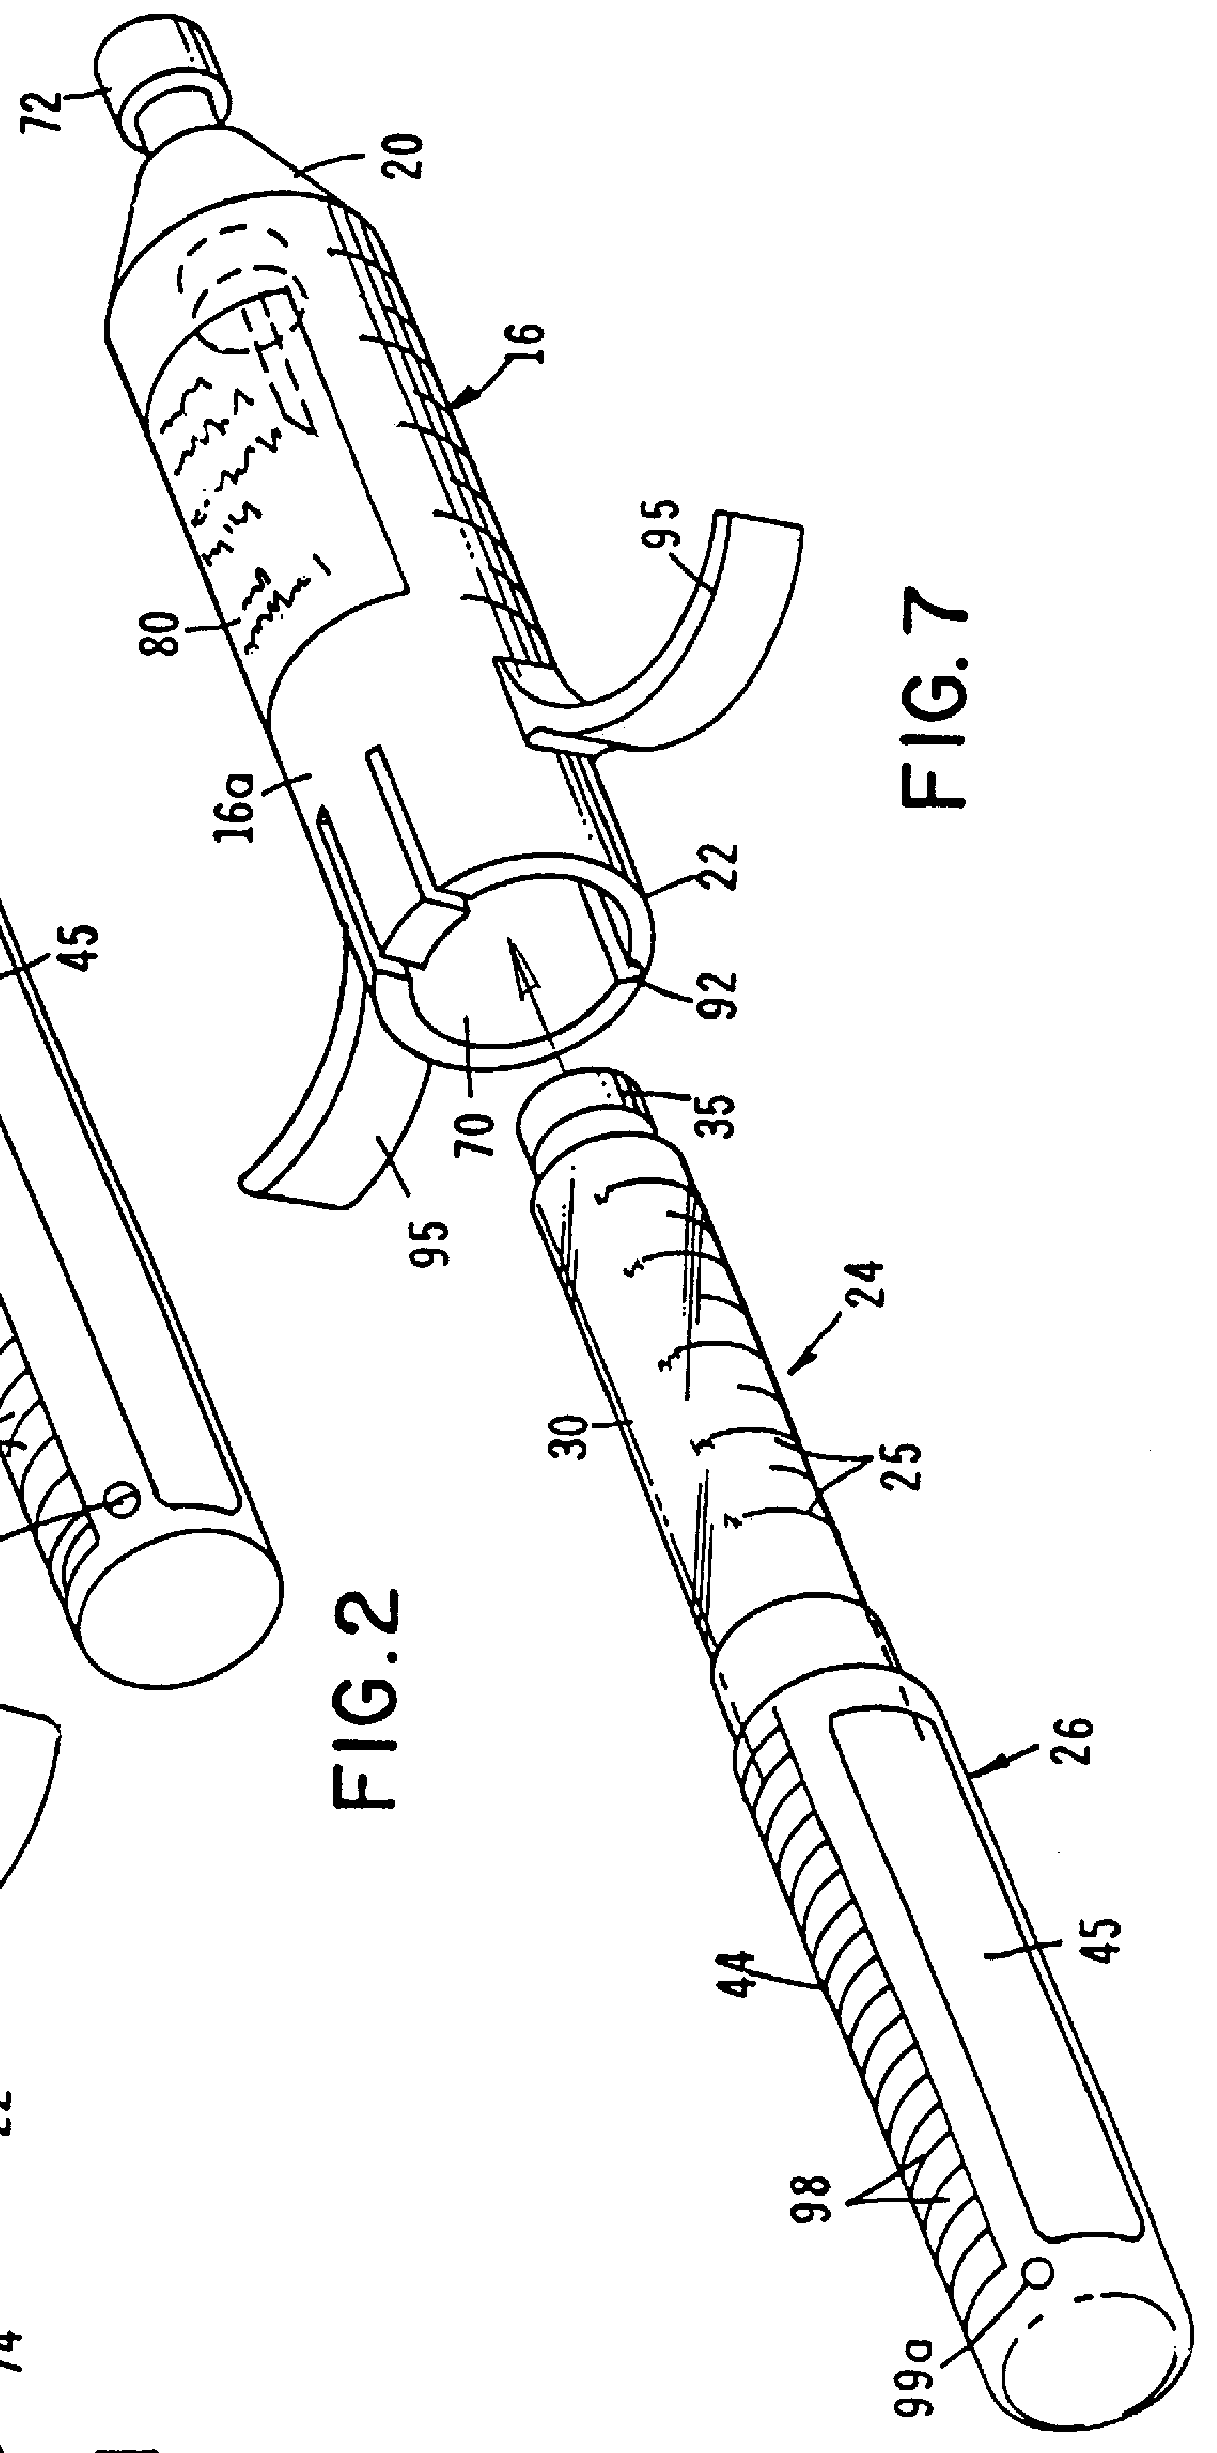 Mixing and delivery syringe assembly